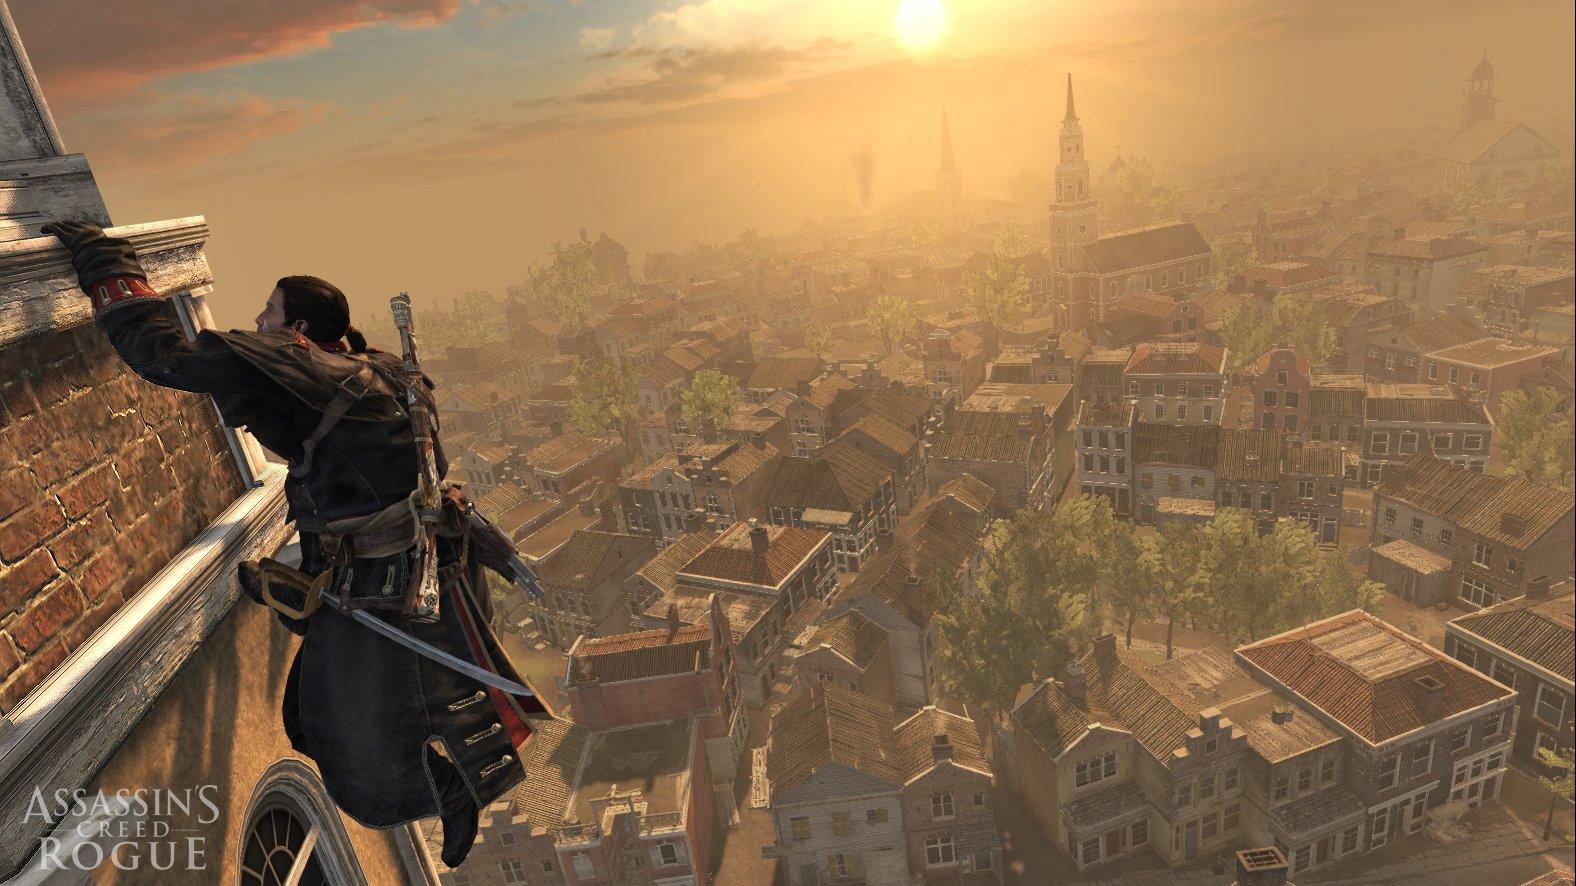 list item 4 of 6 Assassin's Creed Rogue